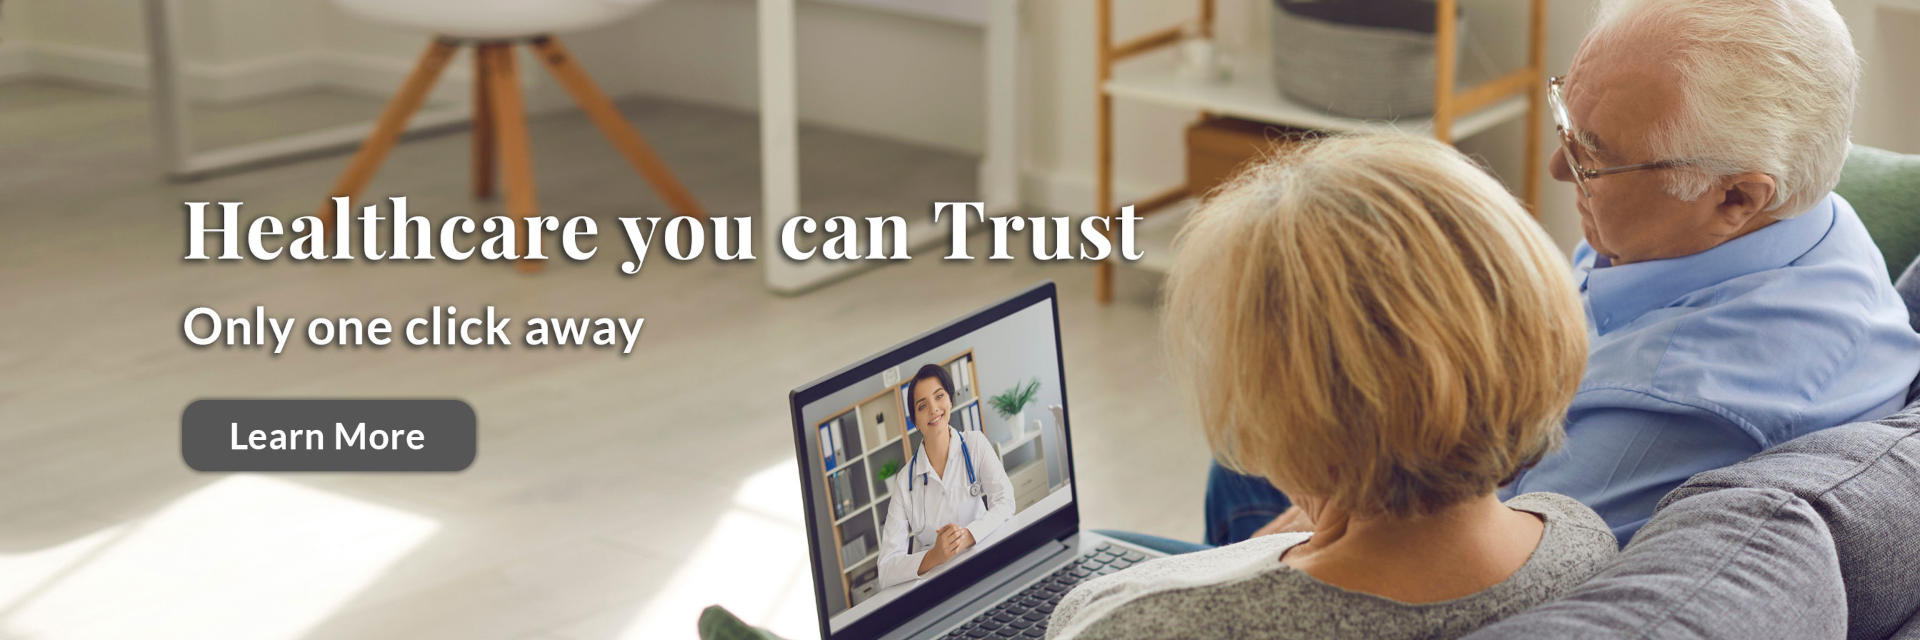 Banner picture of an elderly couple sitting on a couch with an open laptop of a female Physician smiling at them. Slogan says Healthcare You Can Trust. Only one click away. Learn More